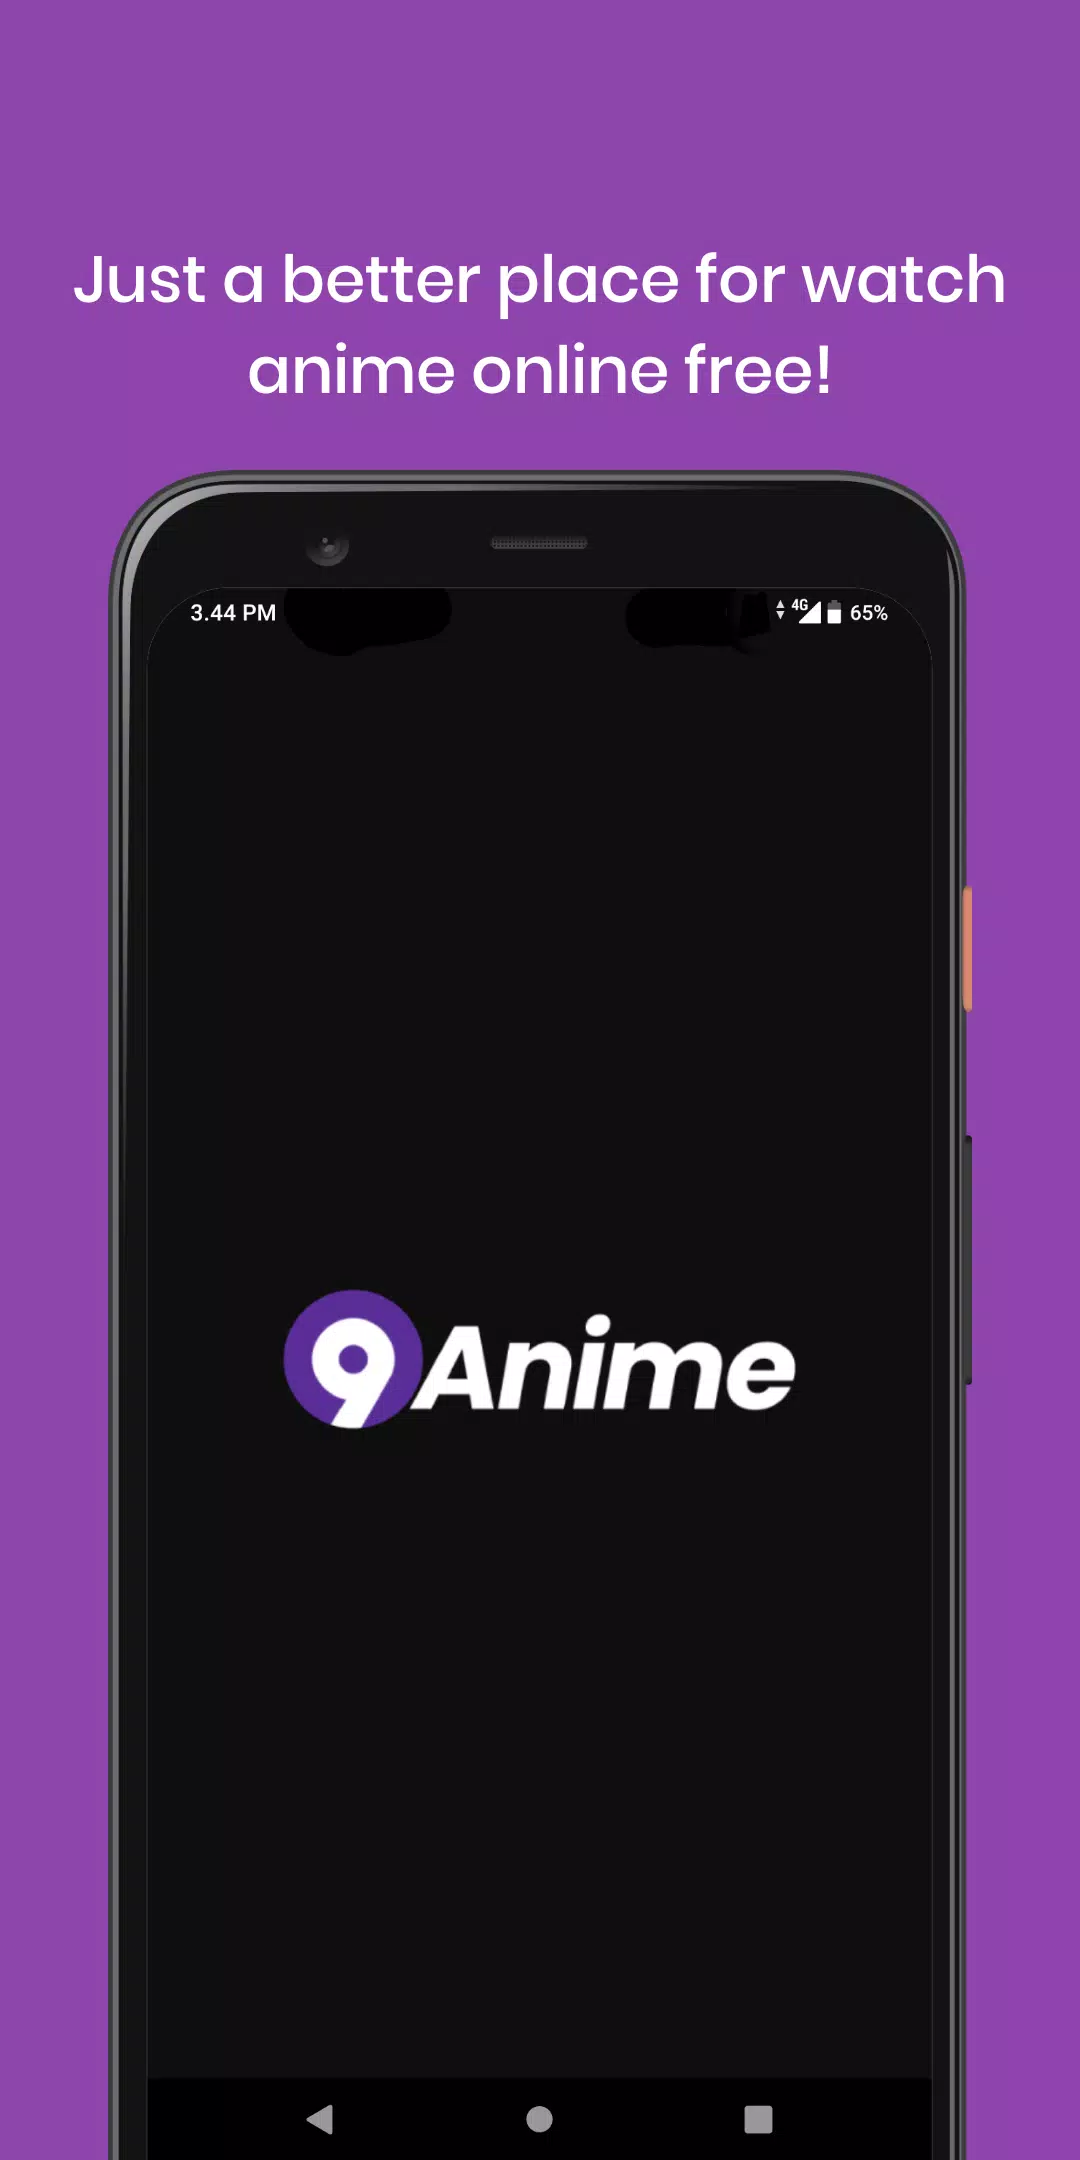 9ANIME - Watch Anime Online APK (Android App) - Free Download